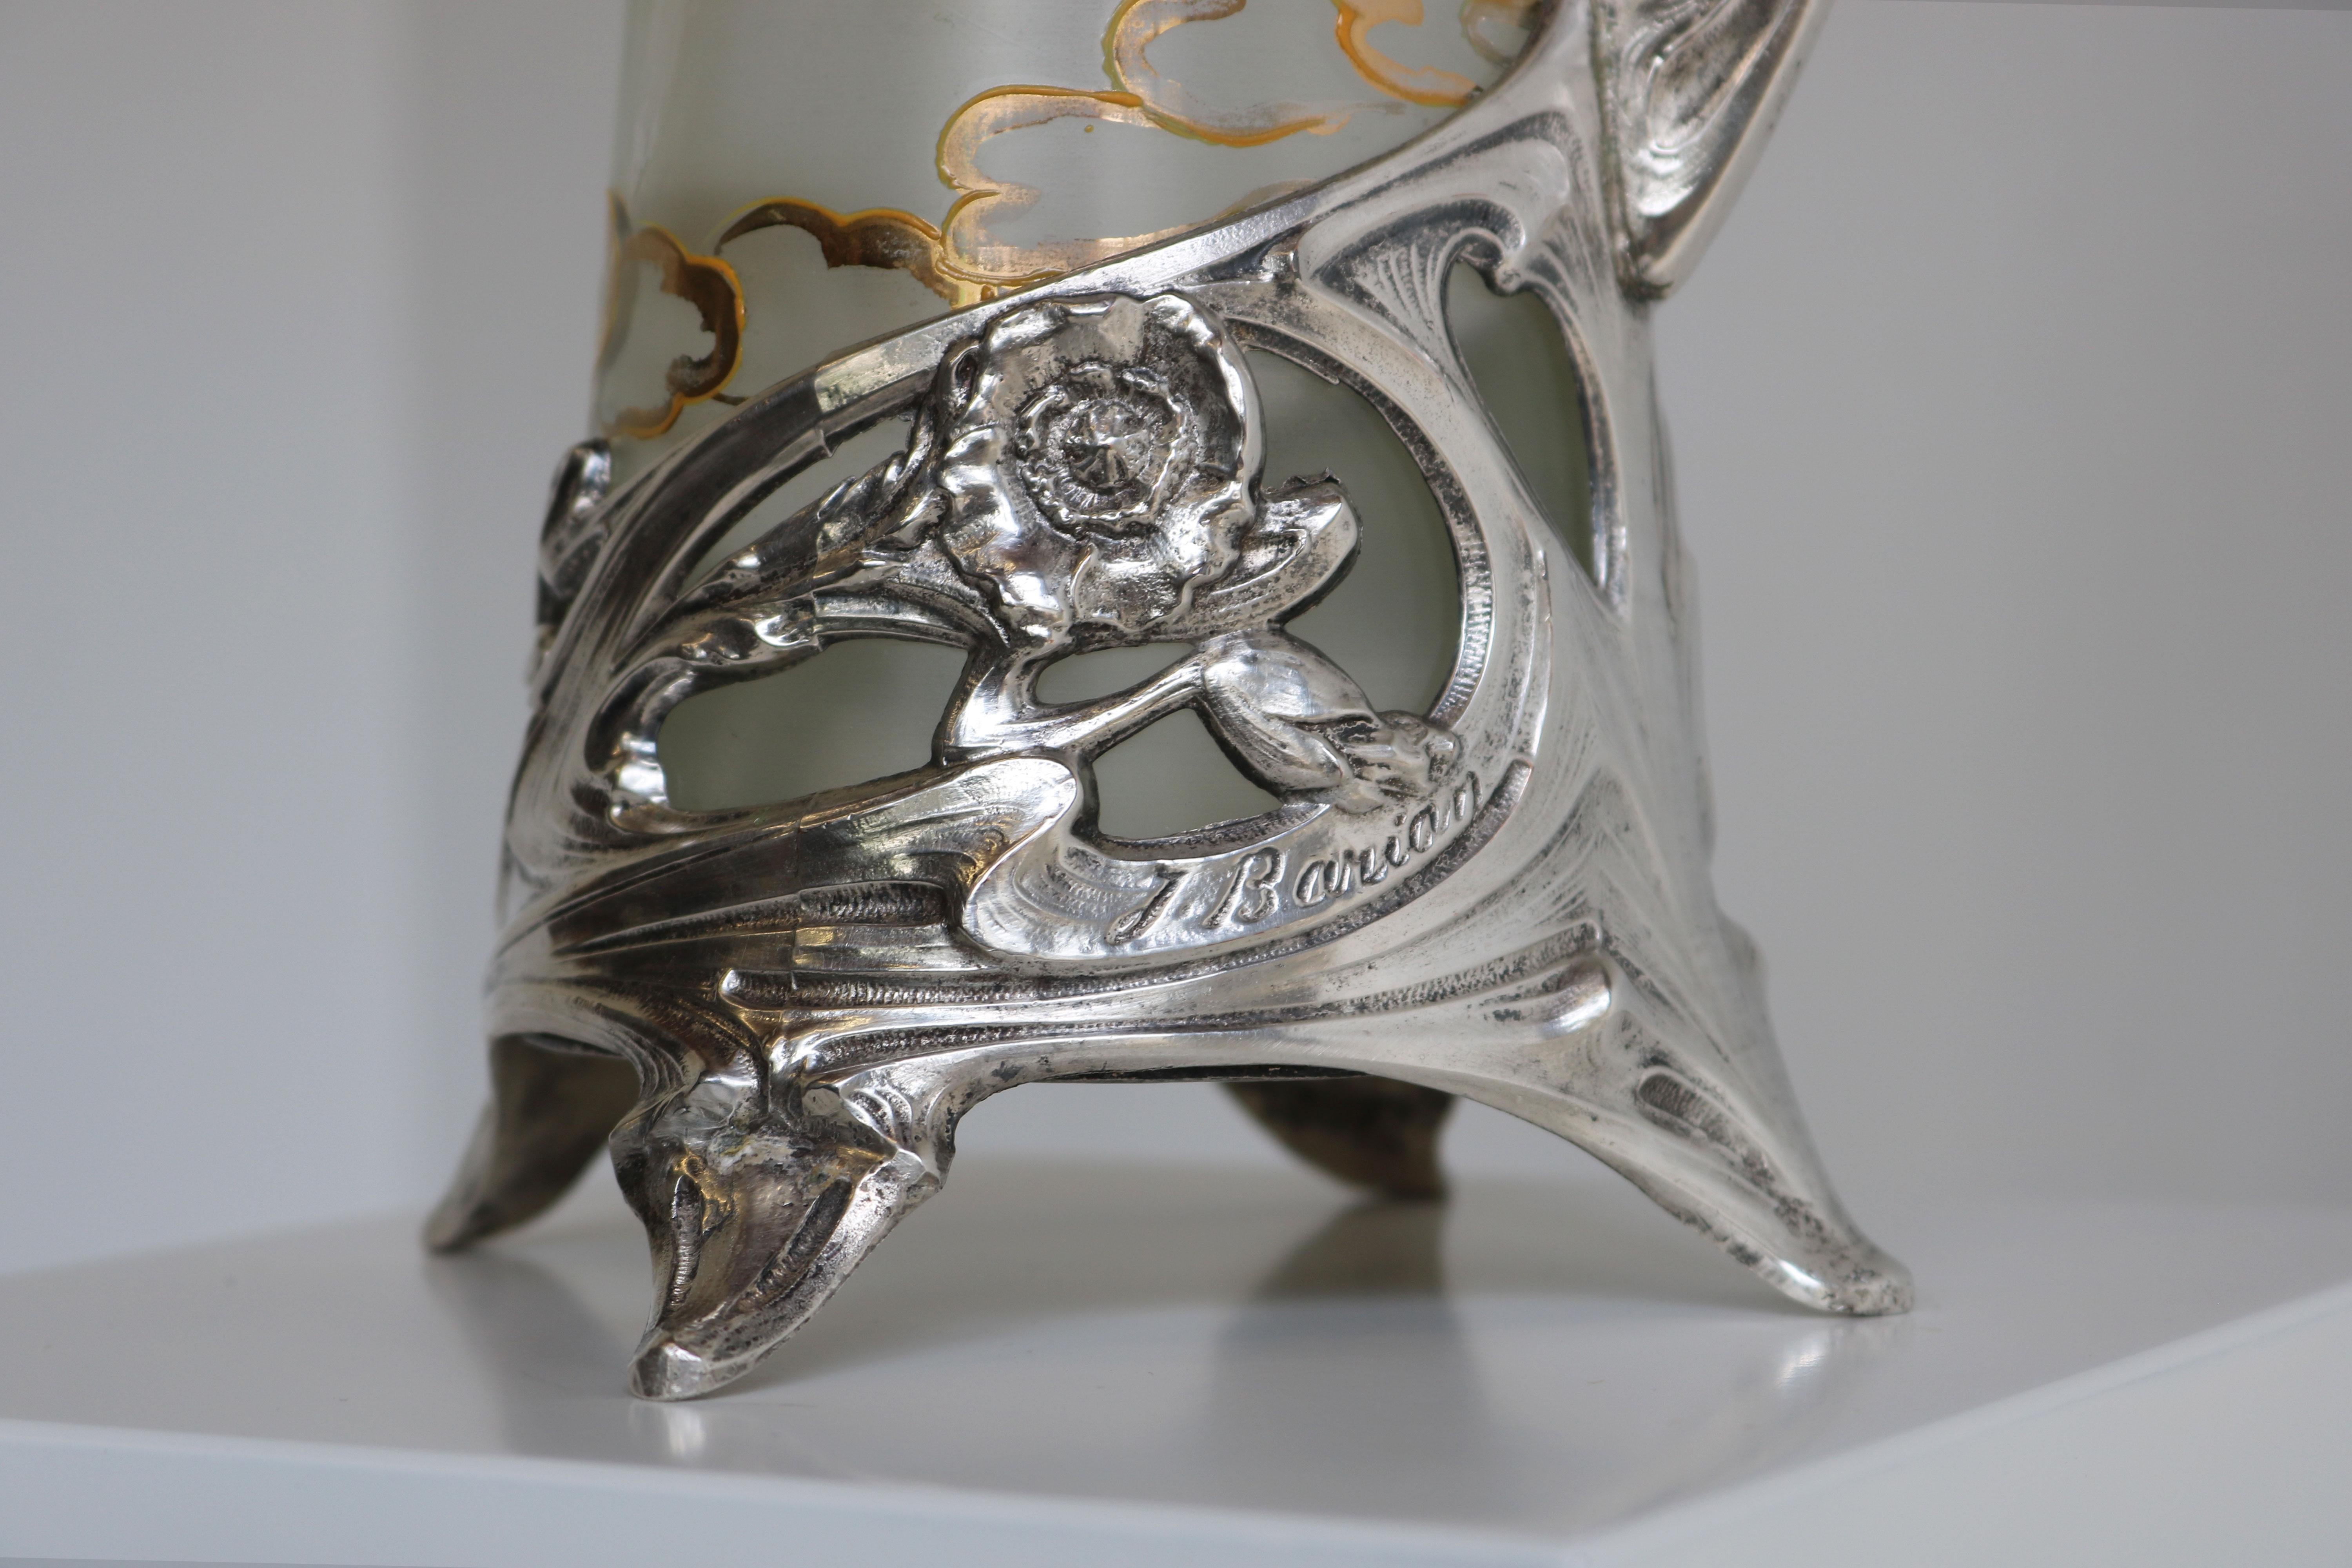 Hand-Crafted Exquisite French Art Nouveau Decanter / Pitcher by J. Barian Silver Glass 1900 For Sale